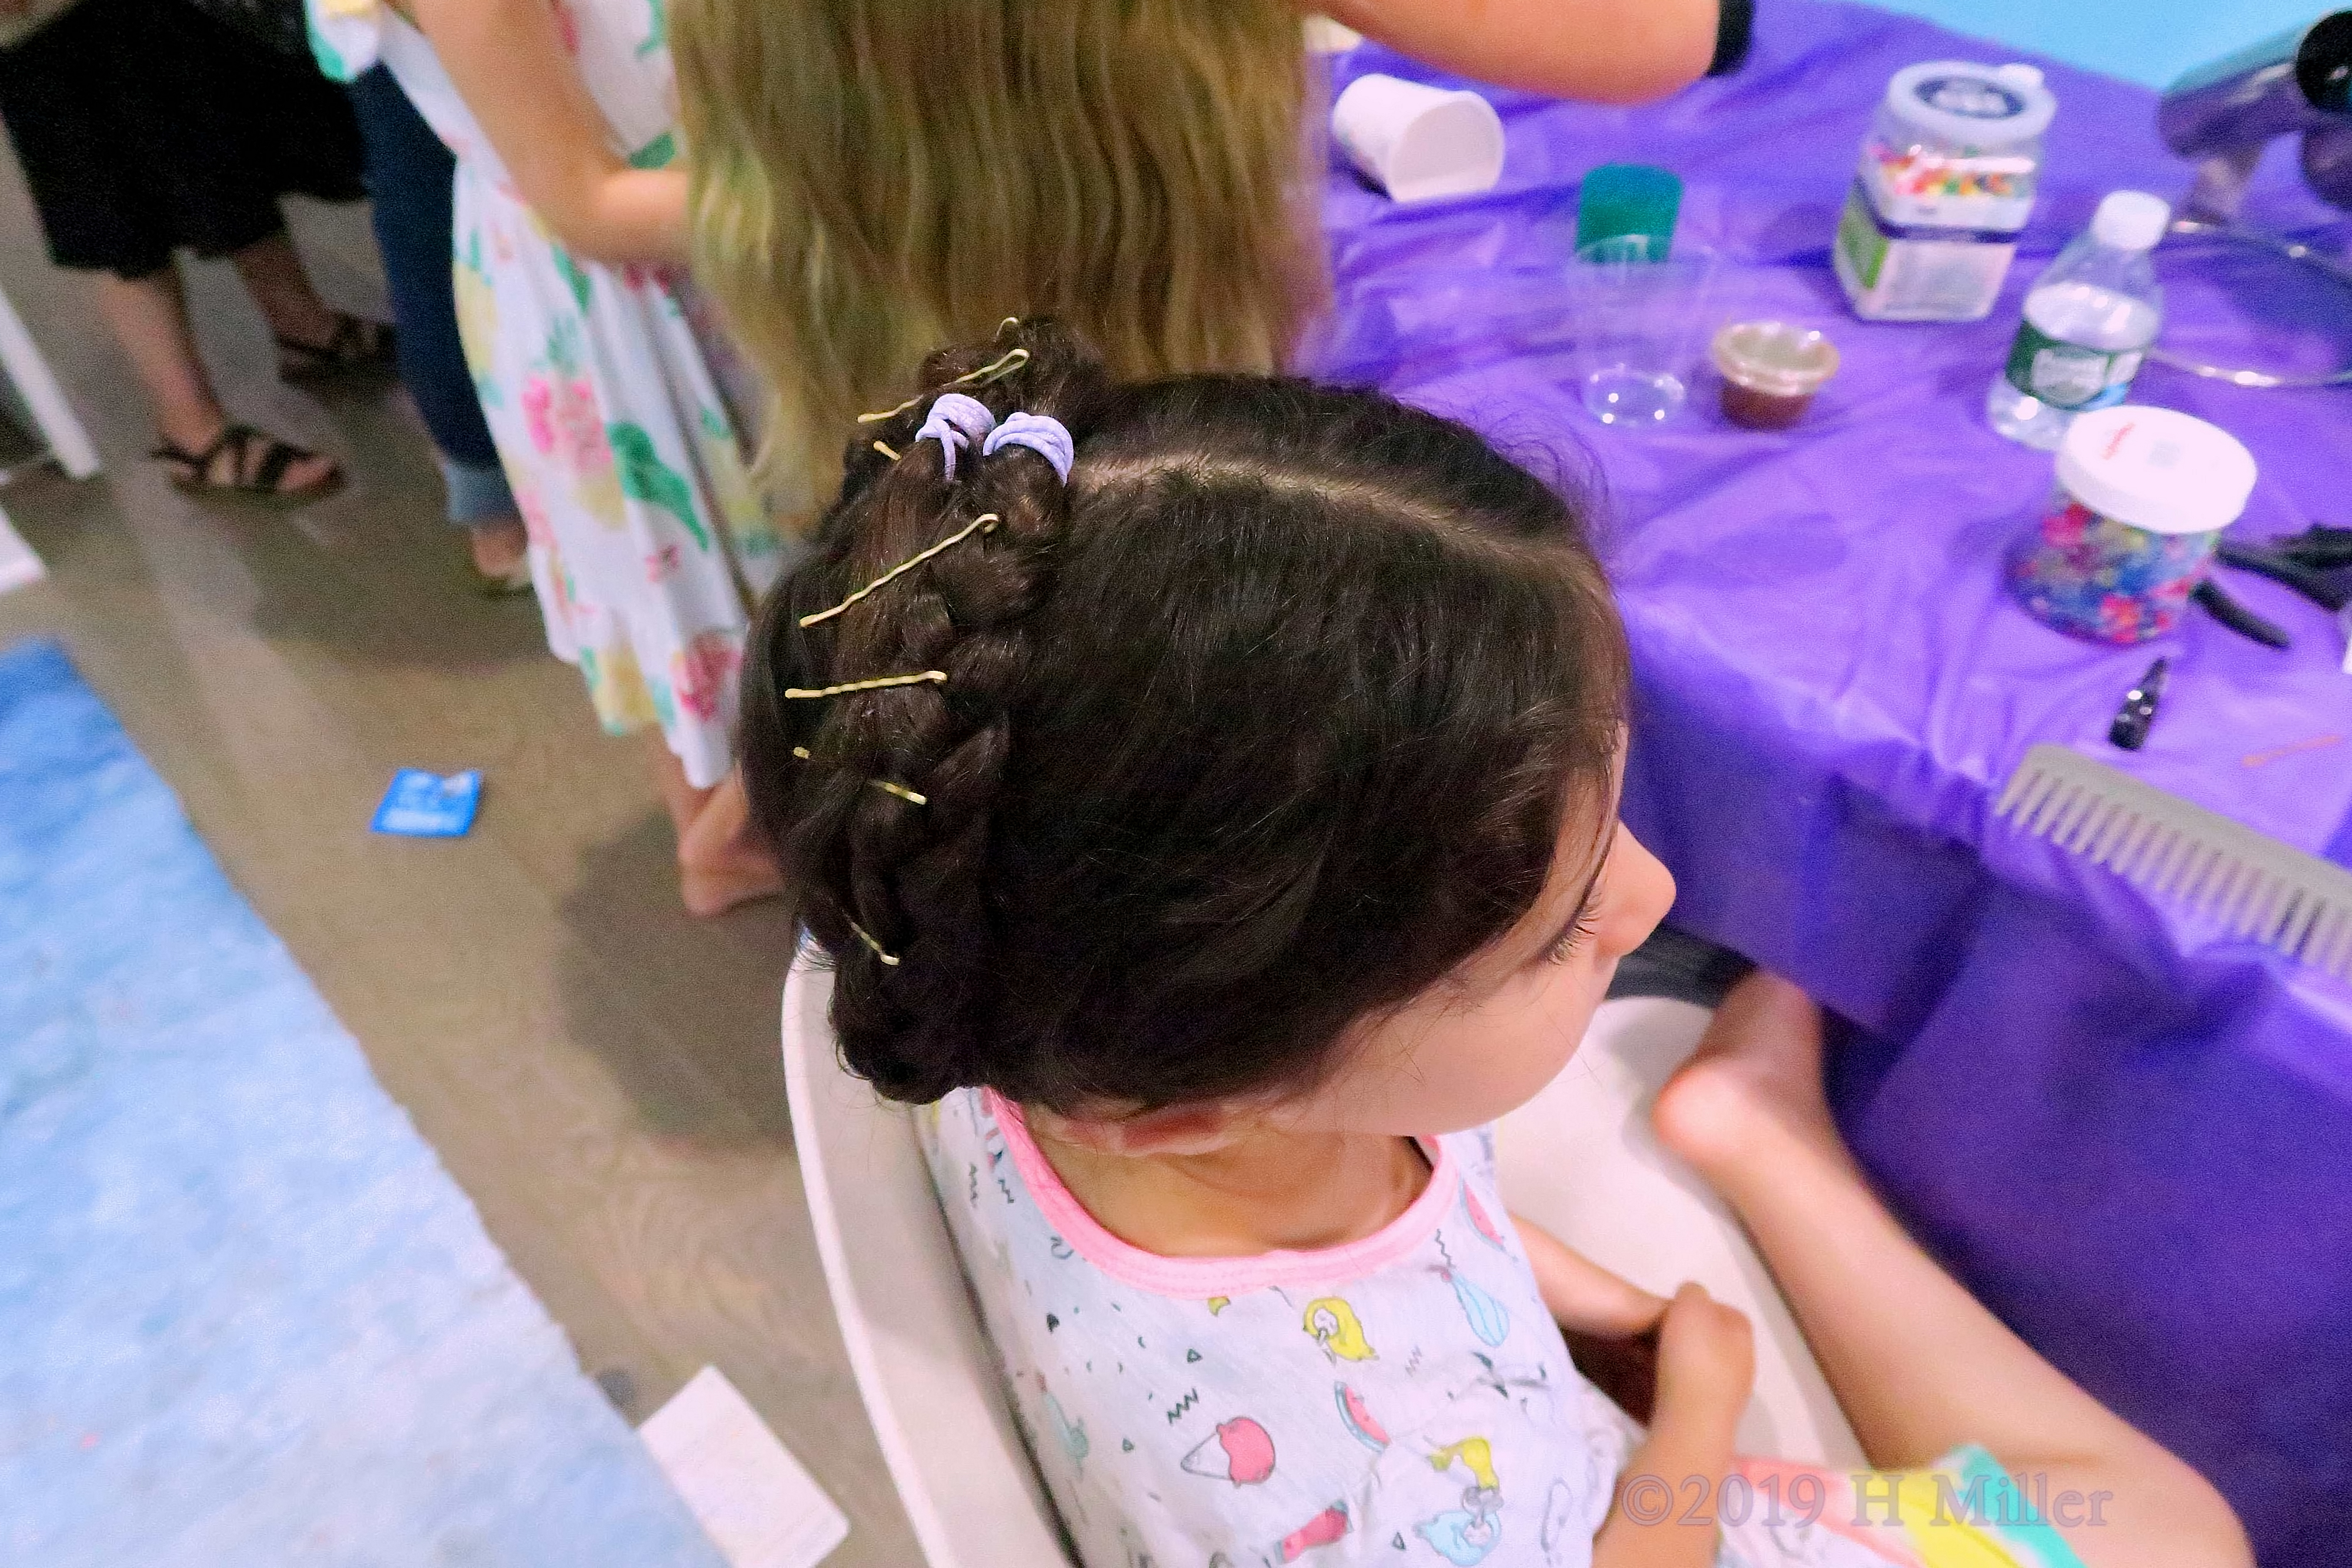 Arielle and Juju's 7th Kids Spa Party